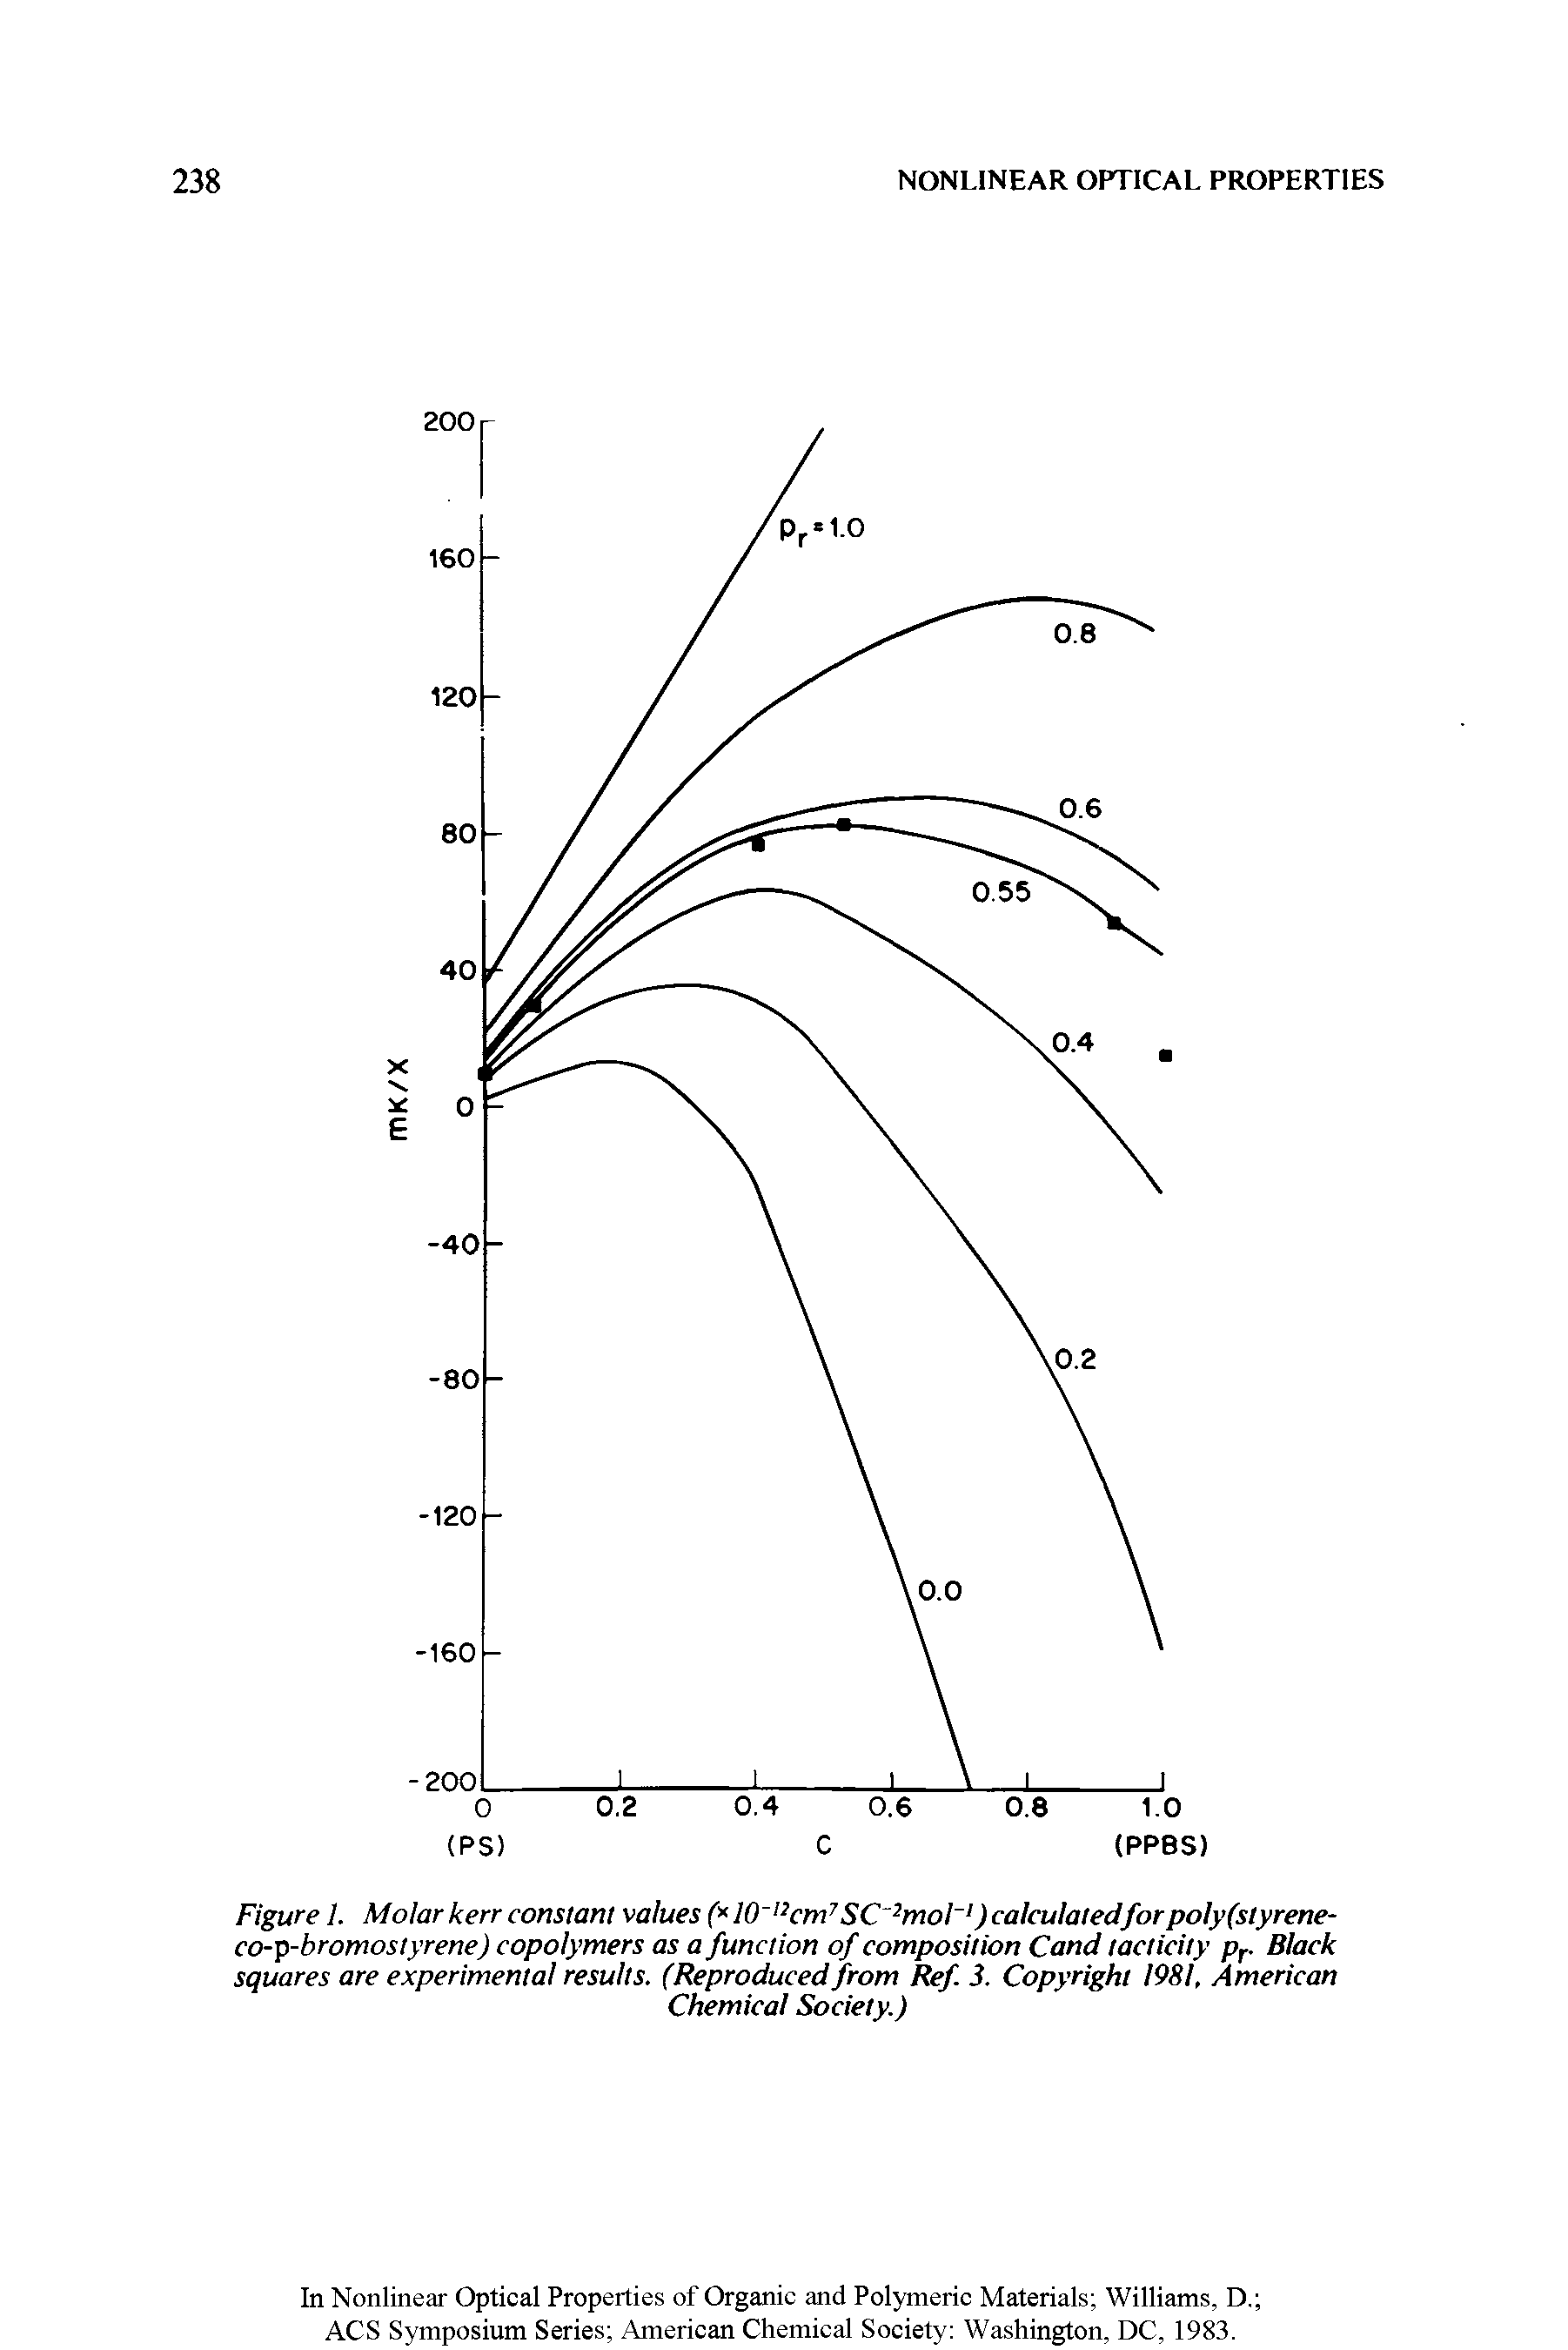 Figure 1. Molar kerr constant values (x 10 ucm7SC 2mot ) calculatedforpolyfstyrene-co-p-bromostyrene) copolymers as a function of composition Cand tact icily pr Black squares are experimental results. (Reproduced from Ref 3. Copyright 1981, American...